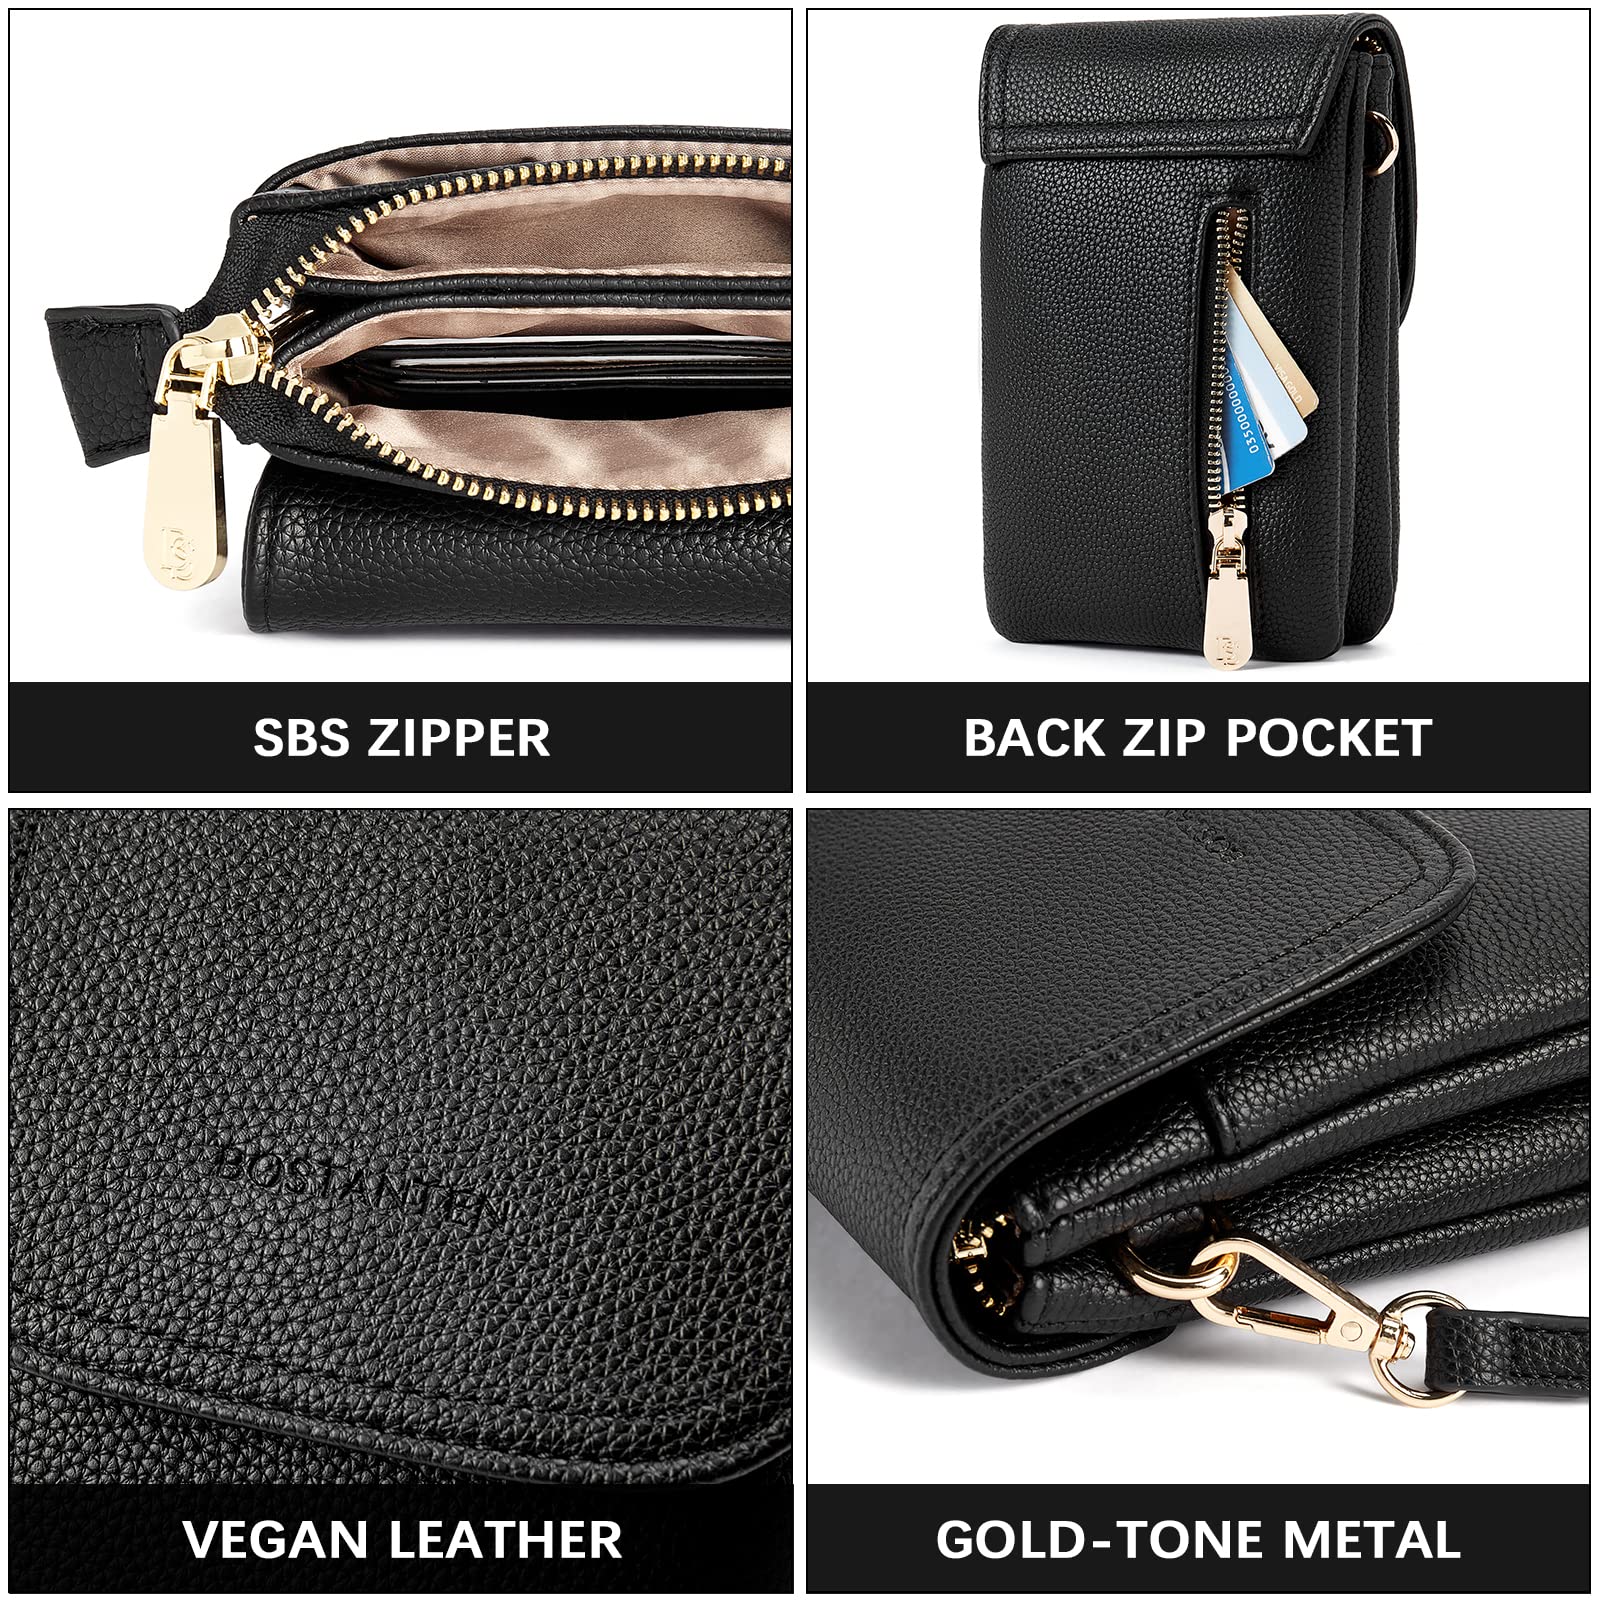 BOSTANTEN Leather Small Crossbody Bags for Women Designer Cell Phone Bag Wallet Purses Adjustable Strap Classic Black